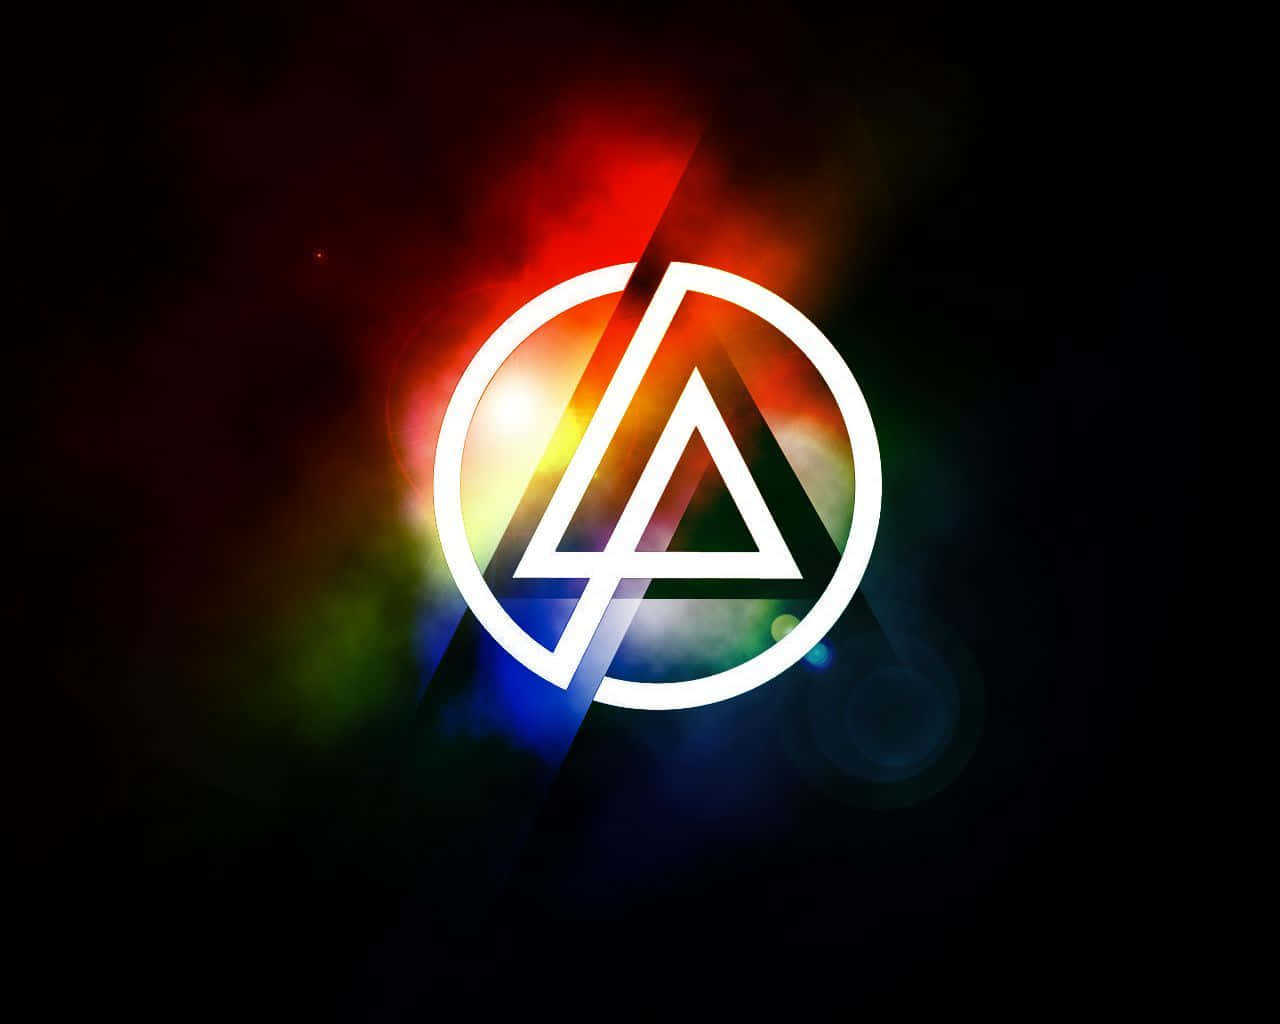 Linkin Park - A Band That Inspires Wallpaper